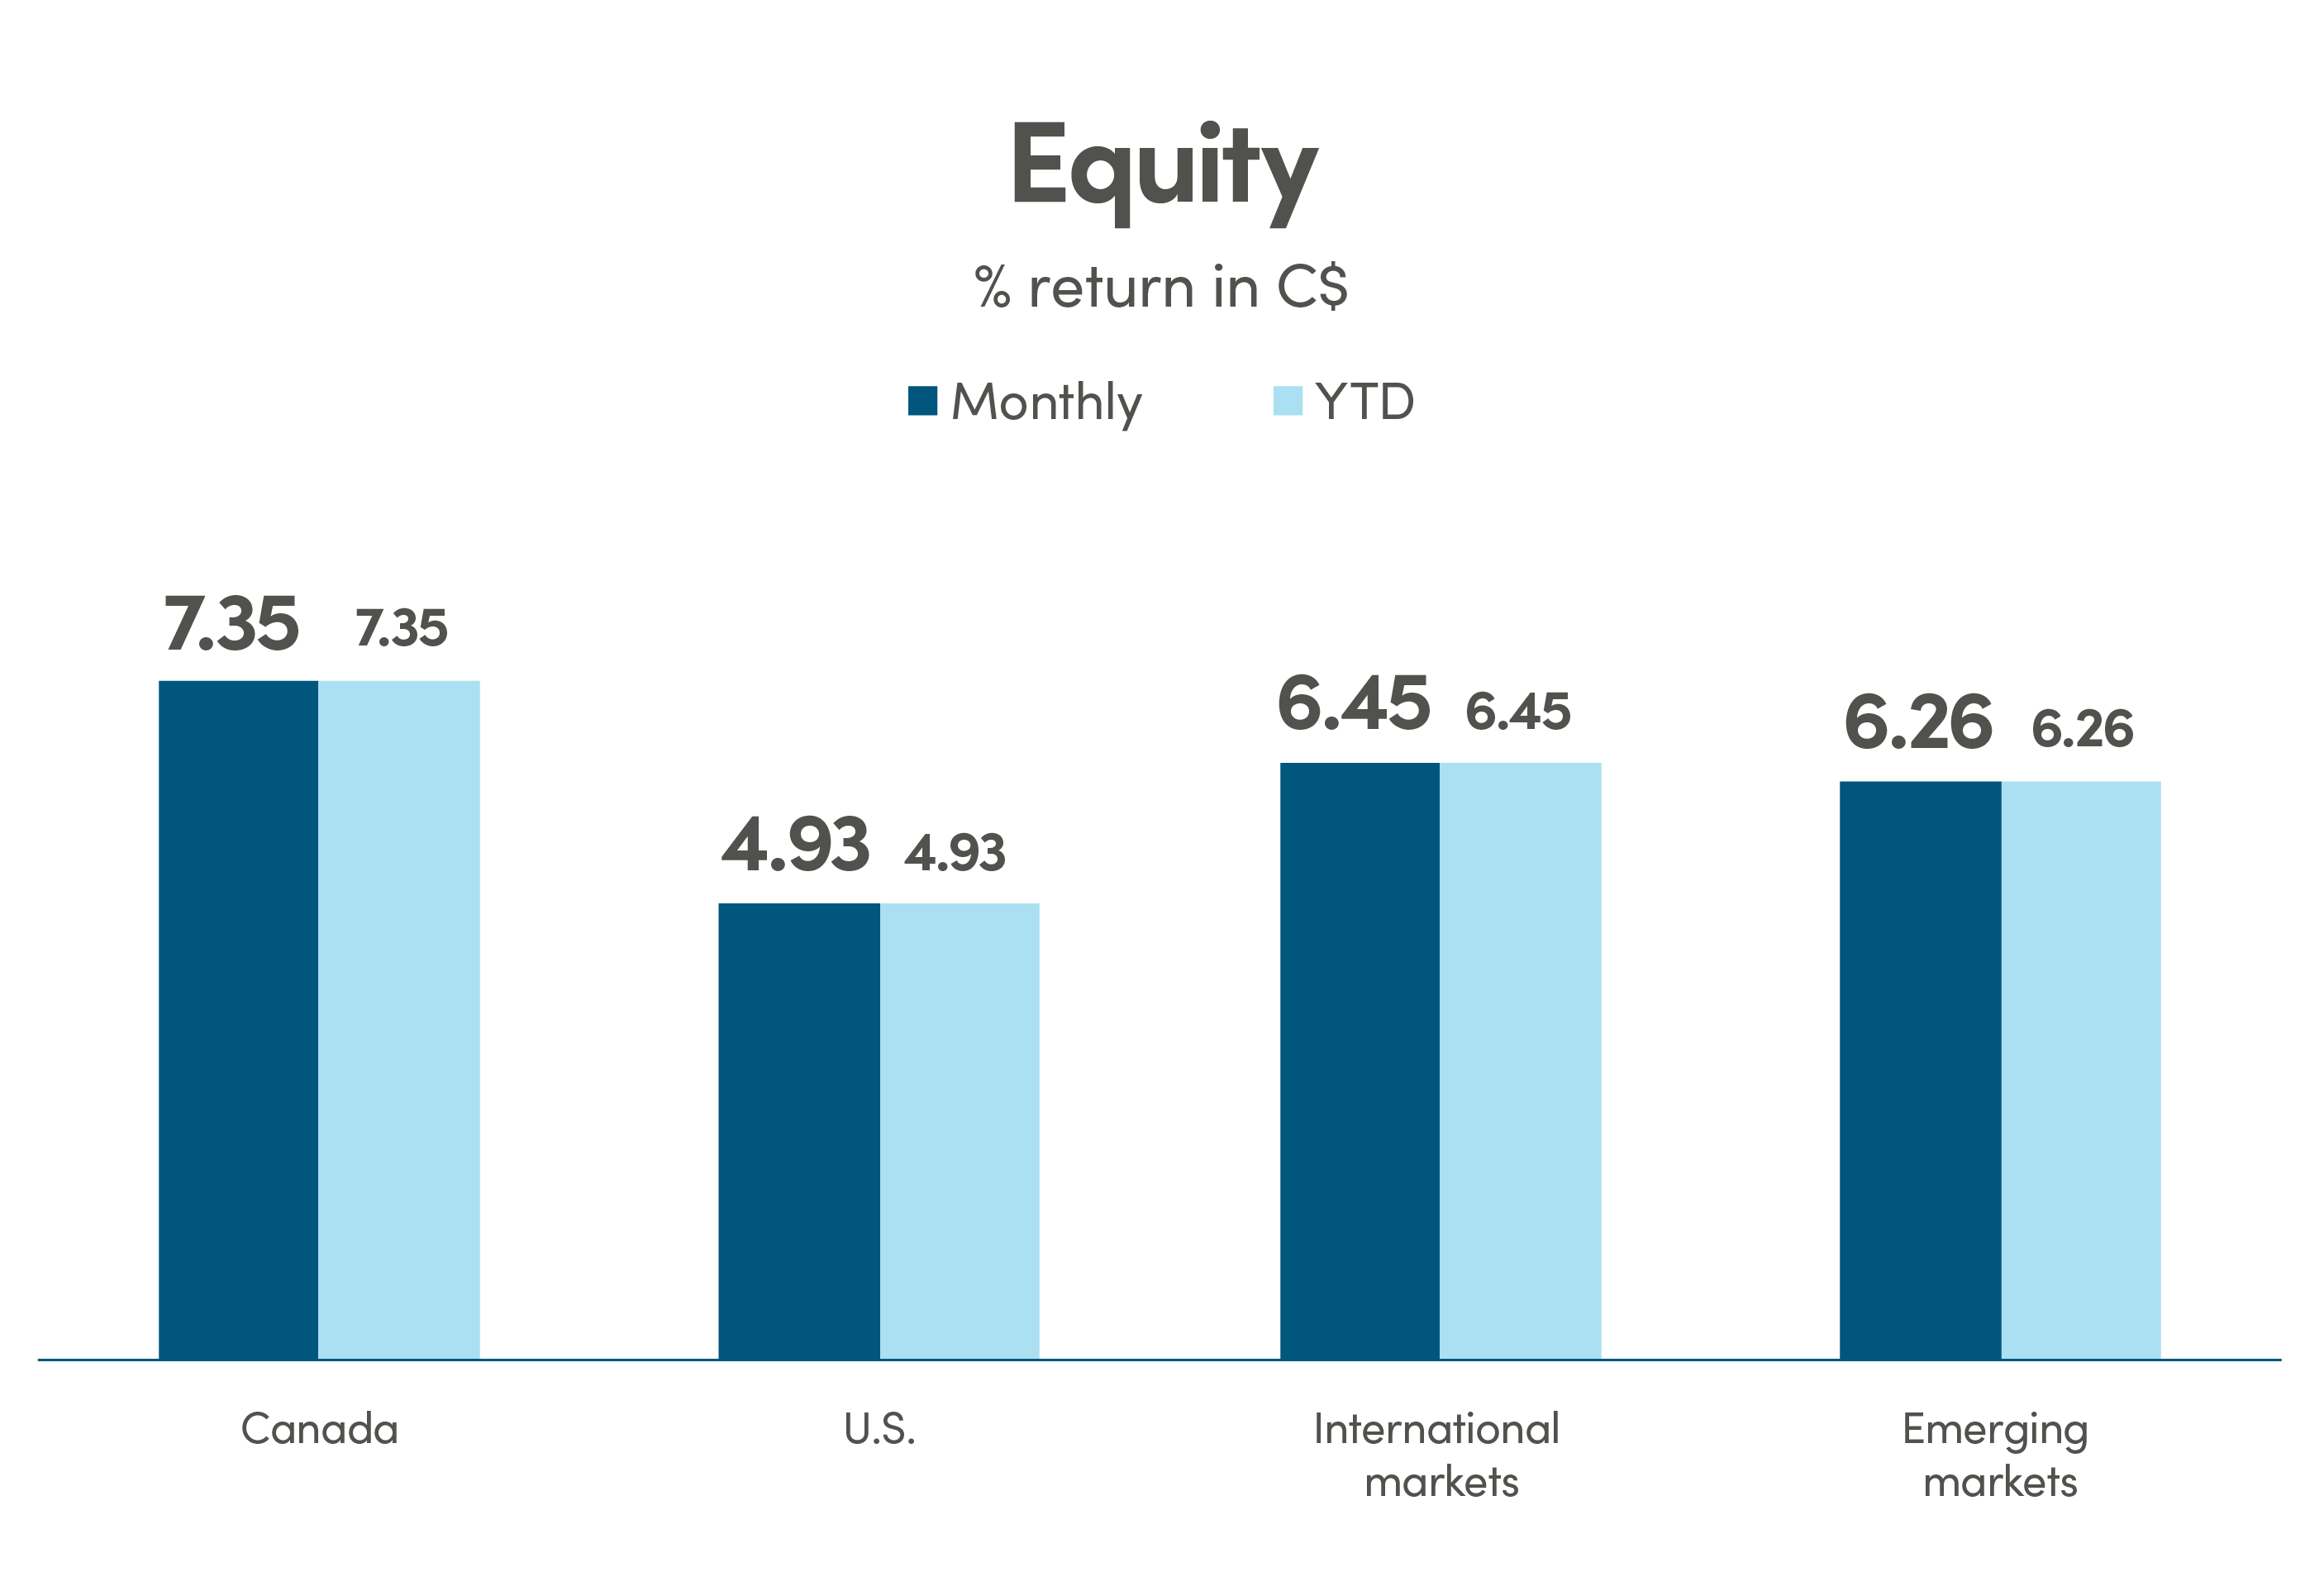 Bar graph showing % return in CAD (C$) for equity. Canada monthly return is 7.35% and YTD is 7.35%. US monthly return is 4.93% and YTD is 4.93%. International markets monthly return is 6.45% and YTD is 6.45%. Emerging markets monthly return is 6.26% and YTD is 6.26%